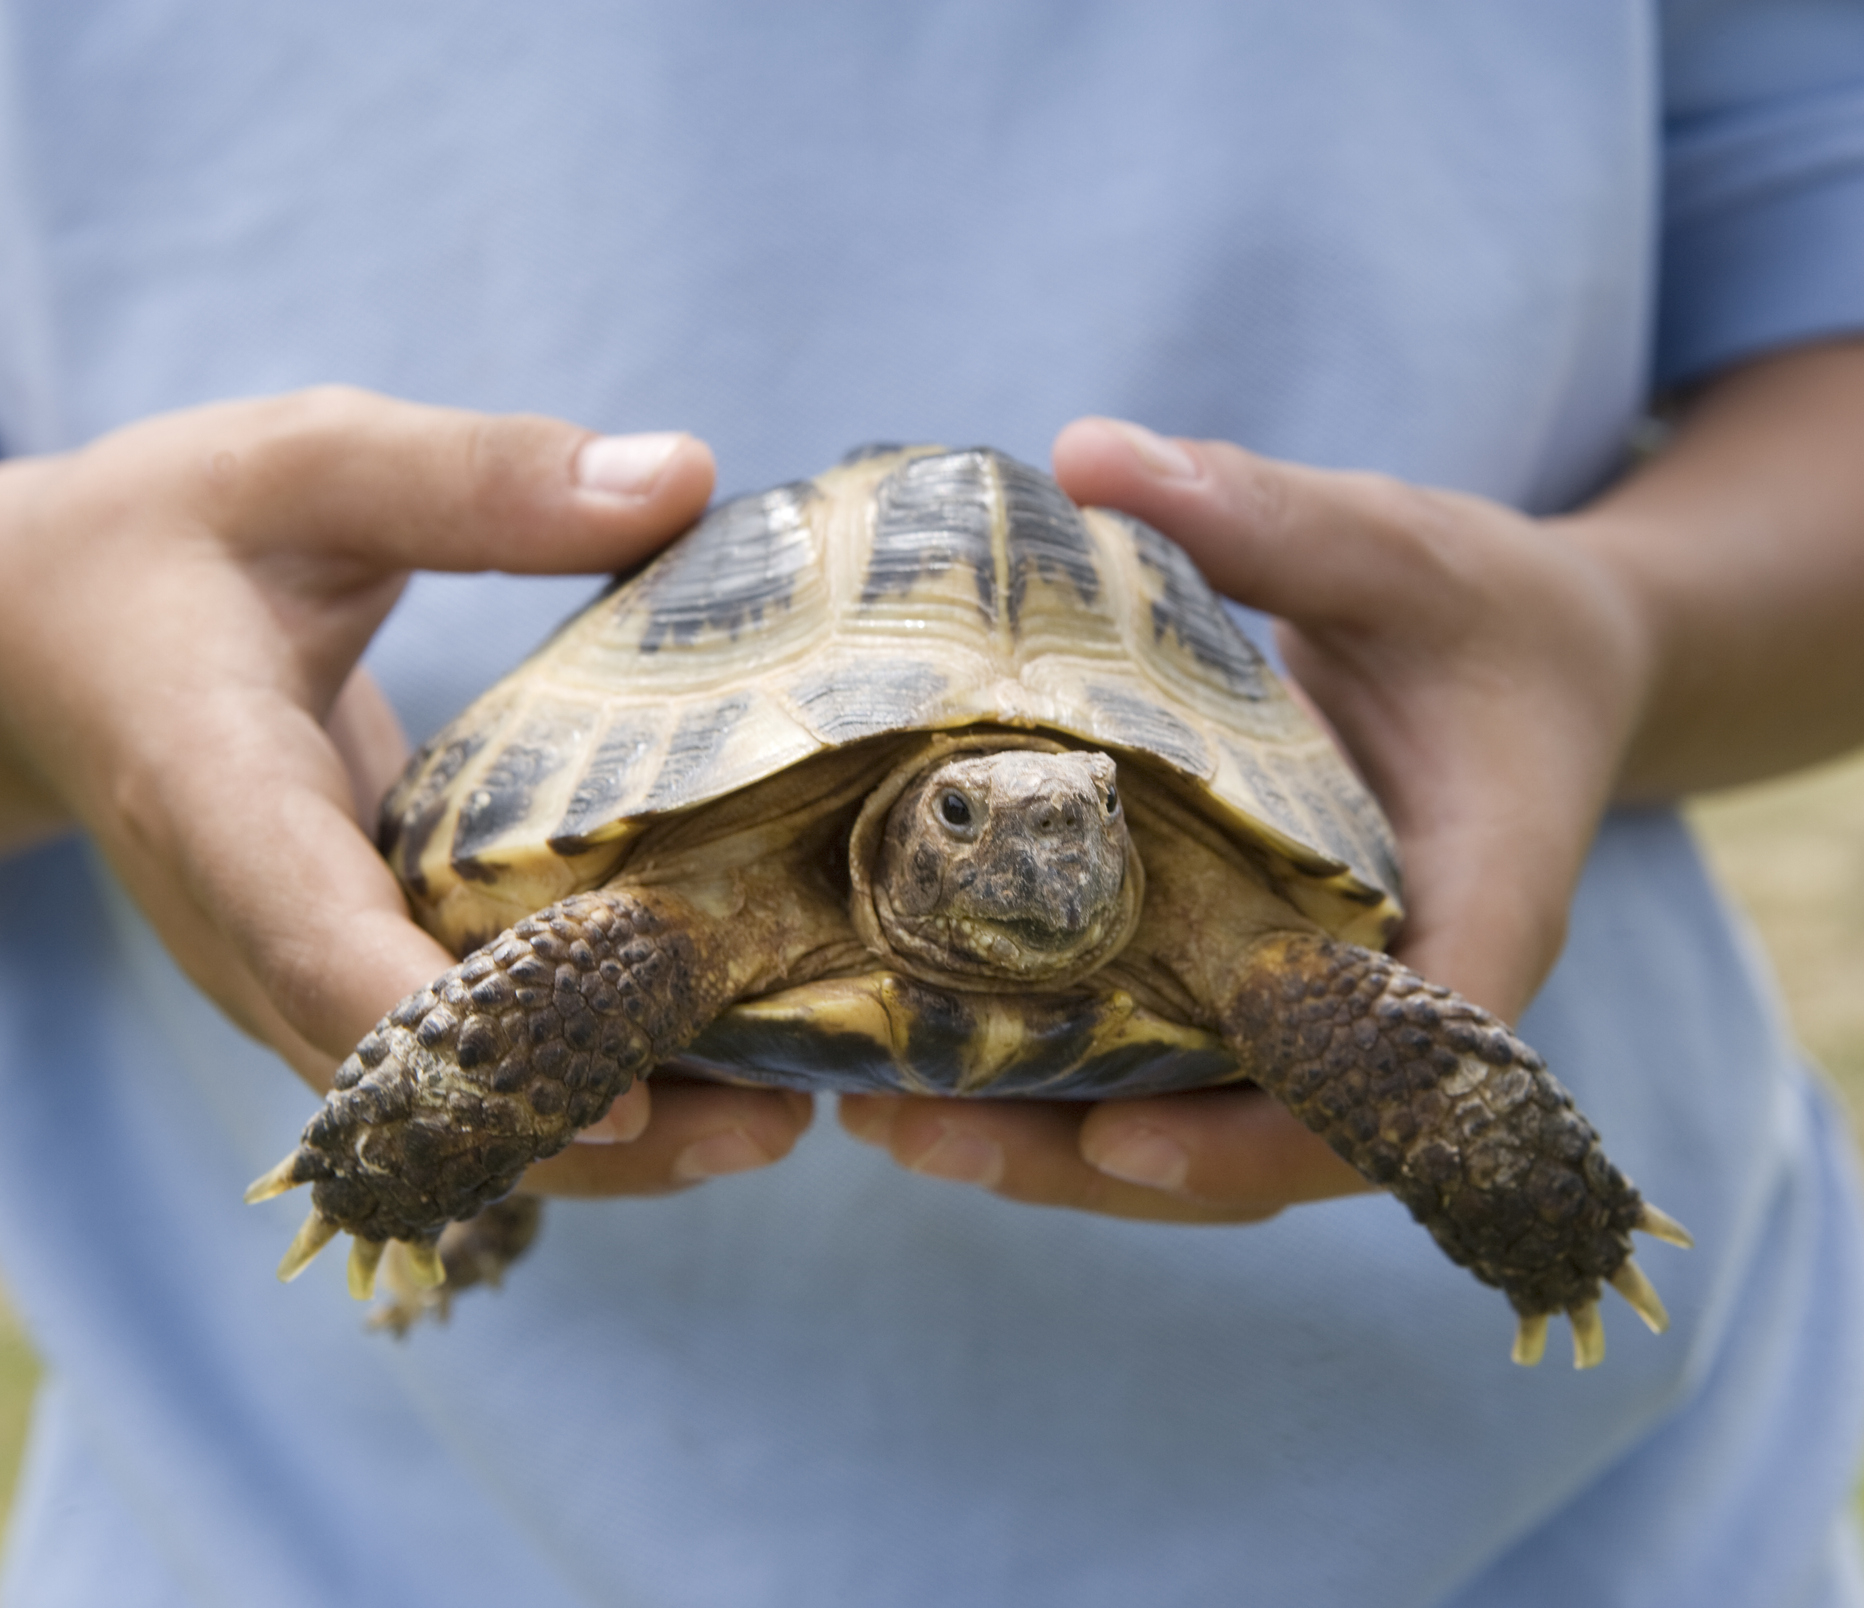 Person holding a small tortoise with both hands, tortoise extending its head and limbs outward